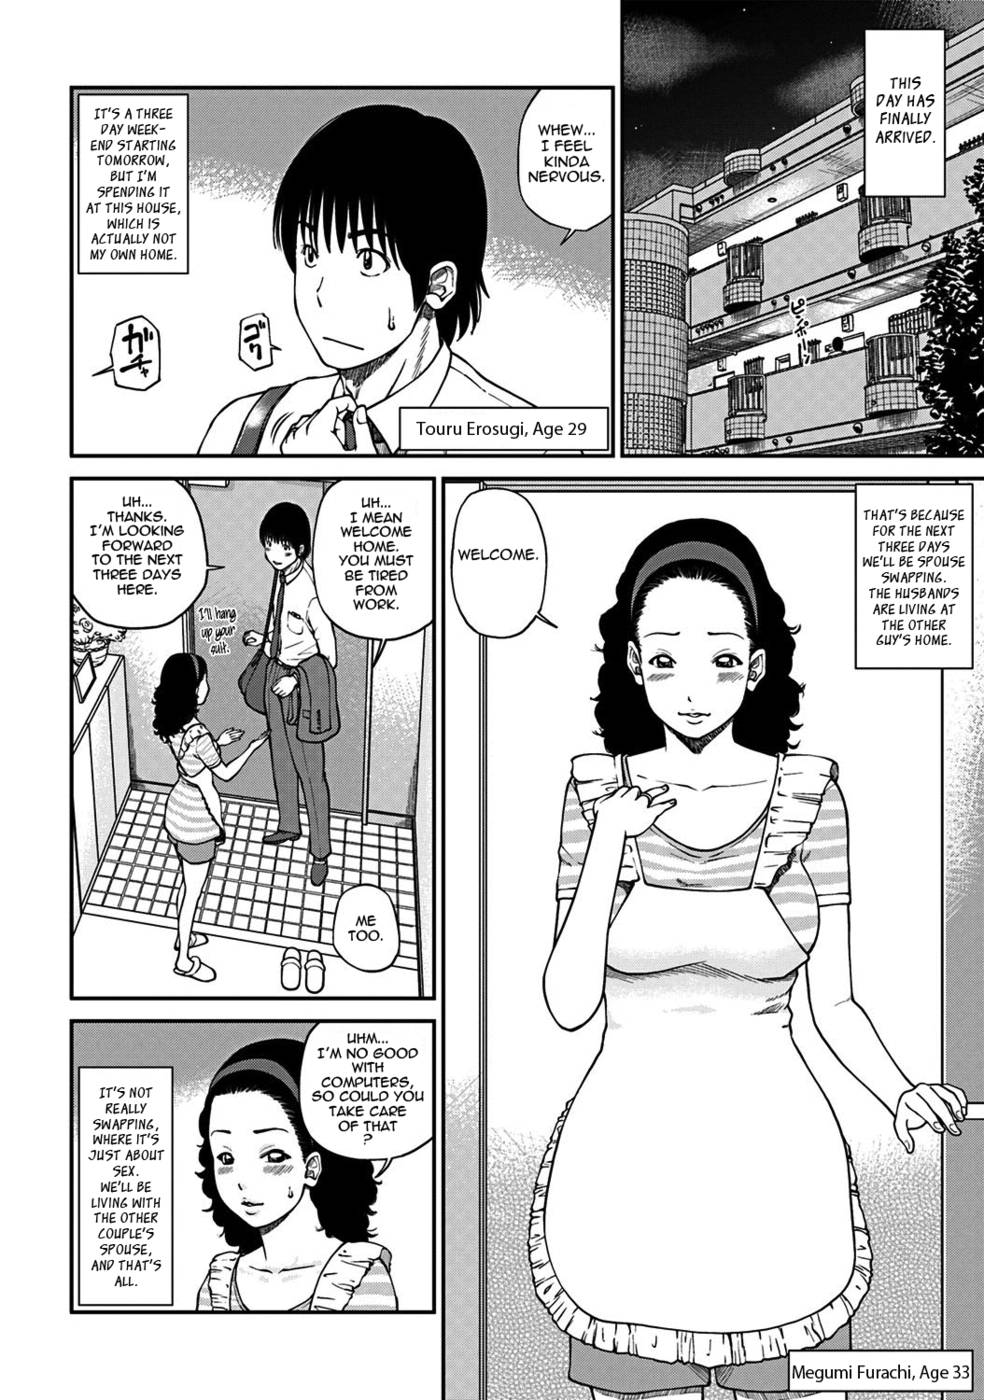 33 Year Old Unsatisfied Wife-Chapter 2-Spouse Swapping-First Night-Hentai Manga Hentai Comic pic